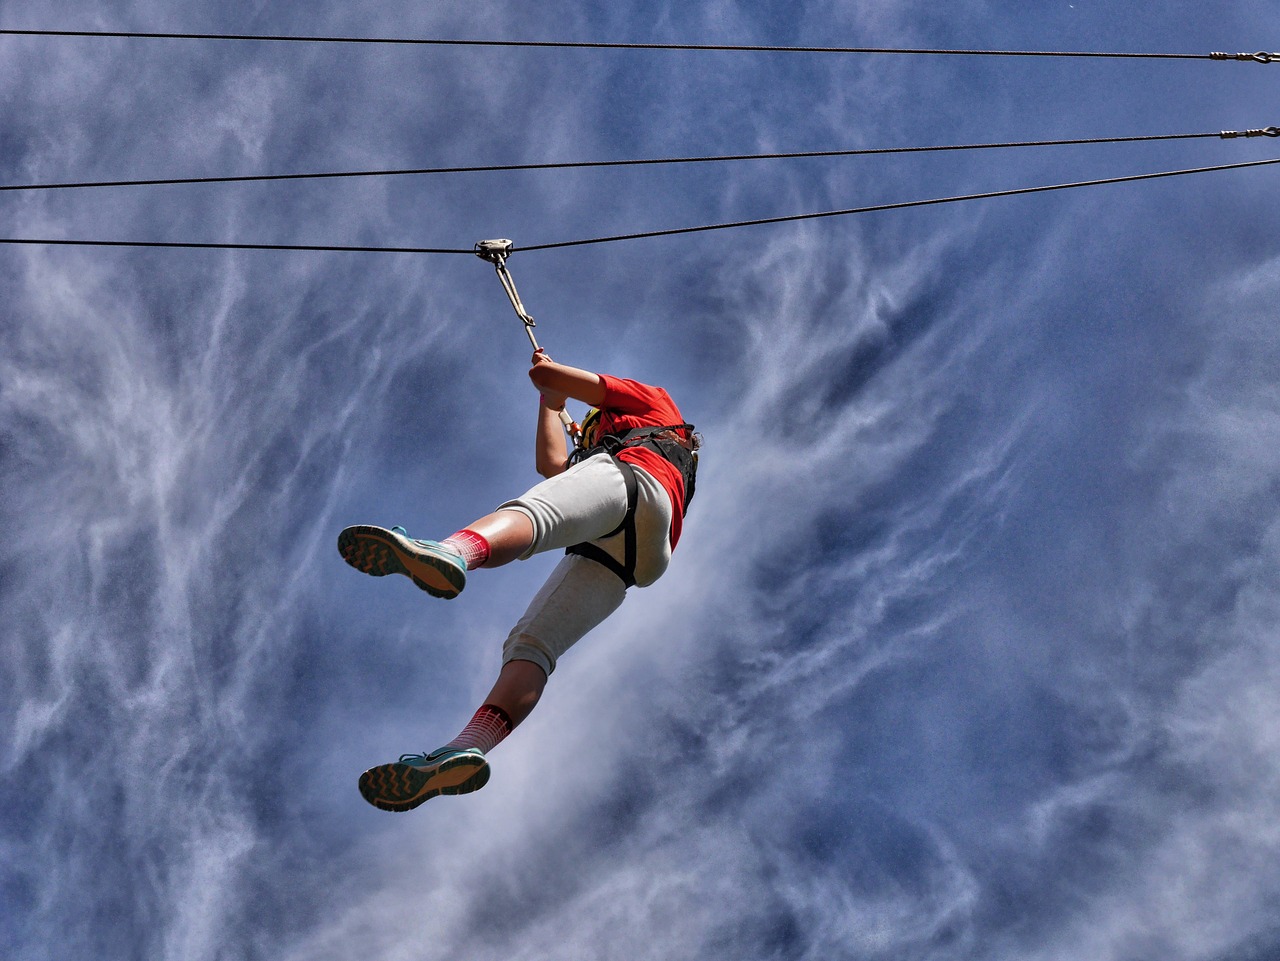 high wire conkers theme park brave girl free photo